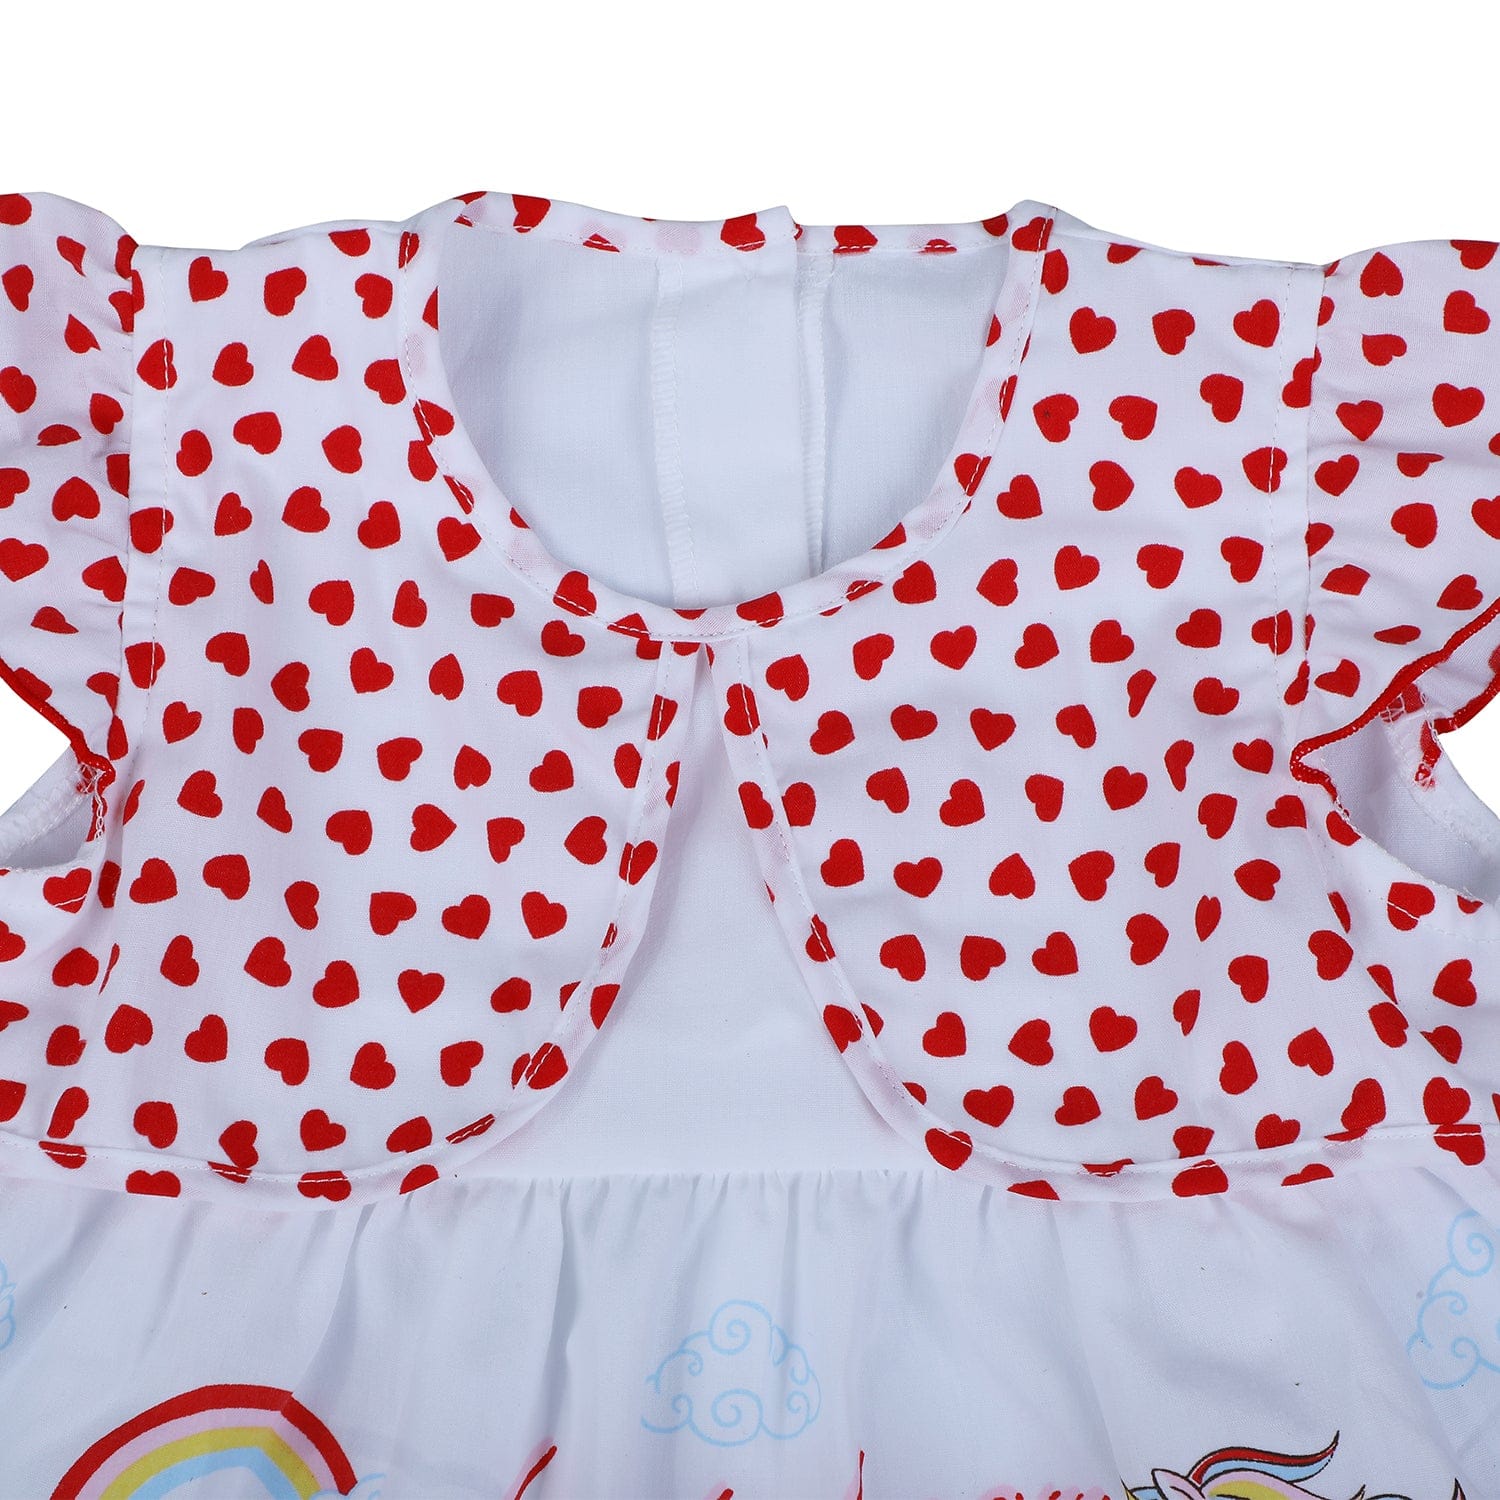 Baby Moo Unicorn Flutter Sleeves Knee Length Frock - Red - Baby Moo